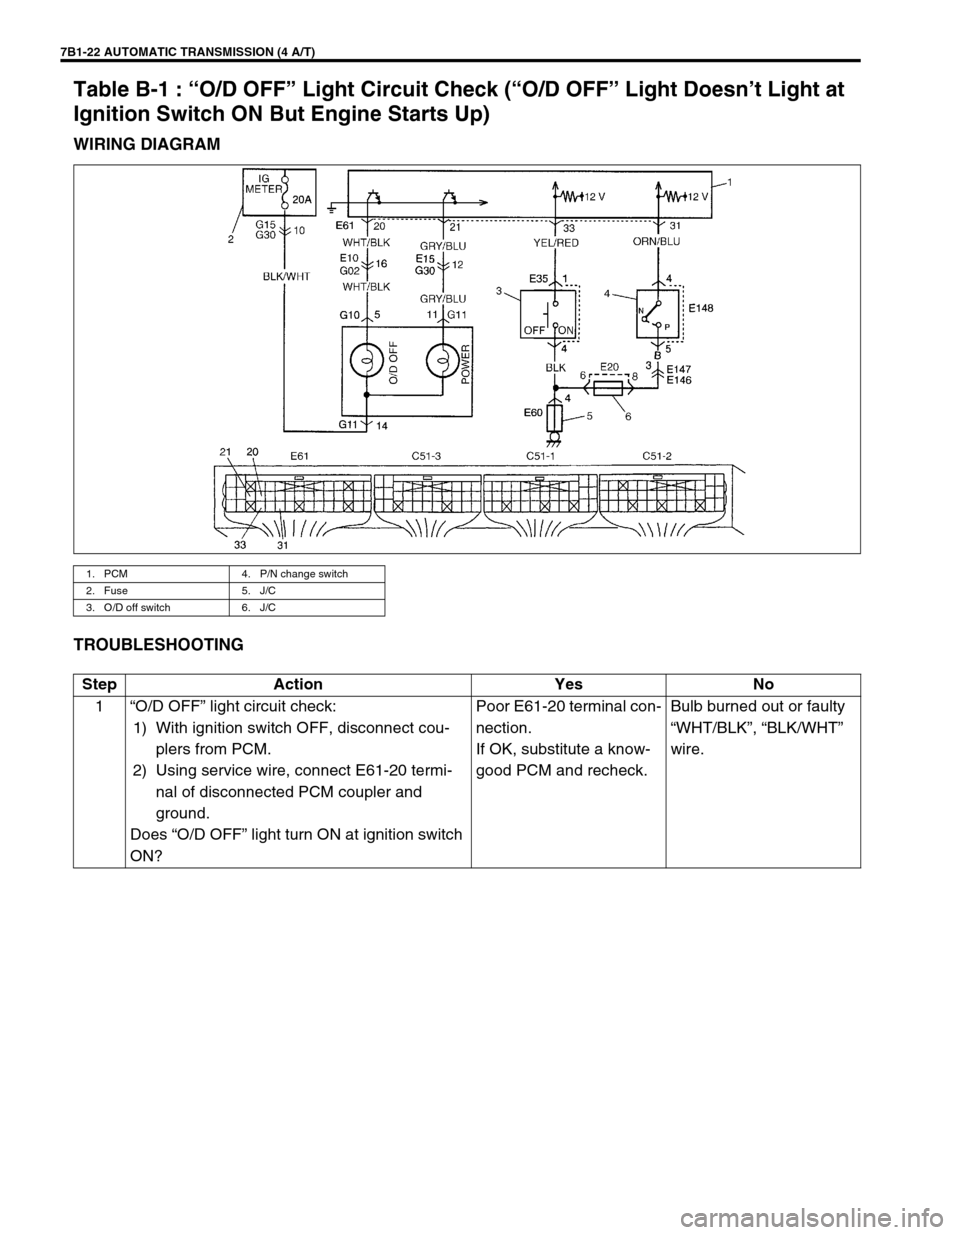 SUZUKI GRAND VITARA 2001 2.G Owners Guide 7B1-22 AUTOMATIC TRANSMISSION (4 A/T)
Table B-1 : “O/D OFF” Light Circuit Check (“O/D OFF” Light Doesn’t Light at 
Ignition Switch ON But Engine Starts Up)
WIRING DIAGRAM
TROUBLESHOOTING
1. 